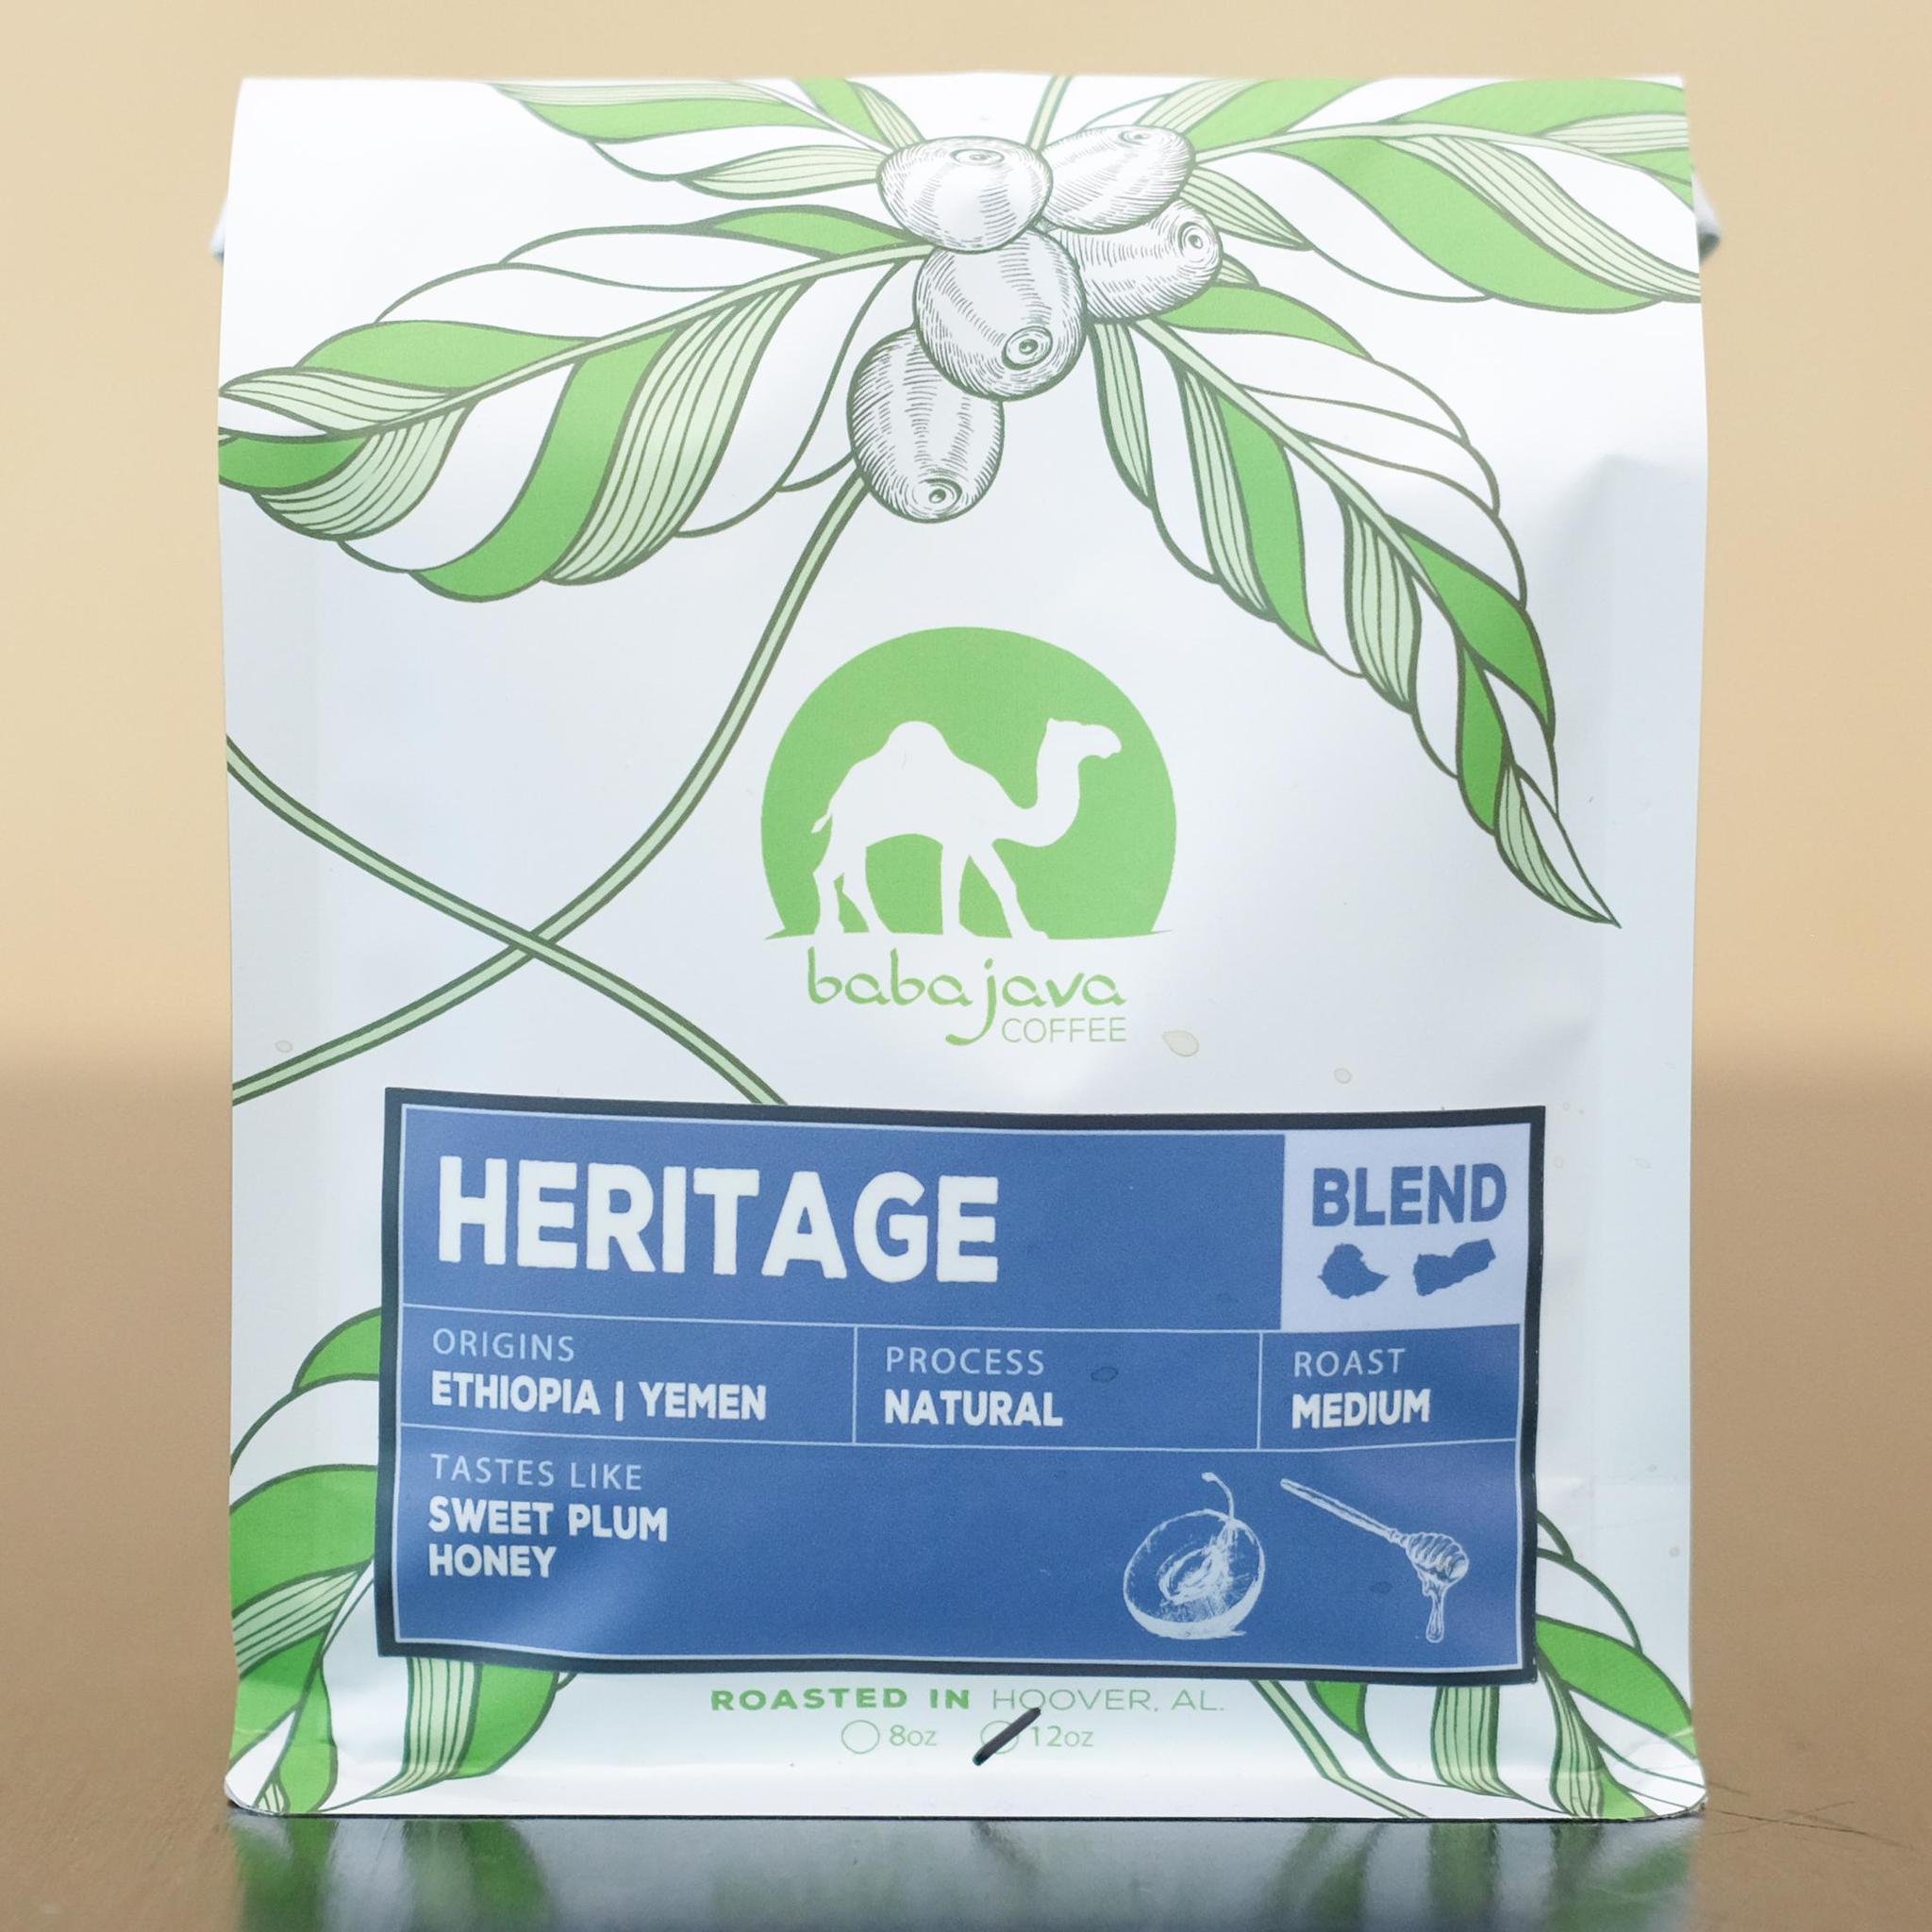 A bag of coffee with a blue label that reads Heritage Blend. The bag has a drawing of a coffee plant and the Baba Java Coffee logo.